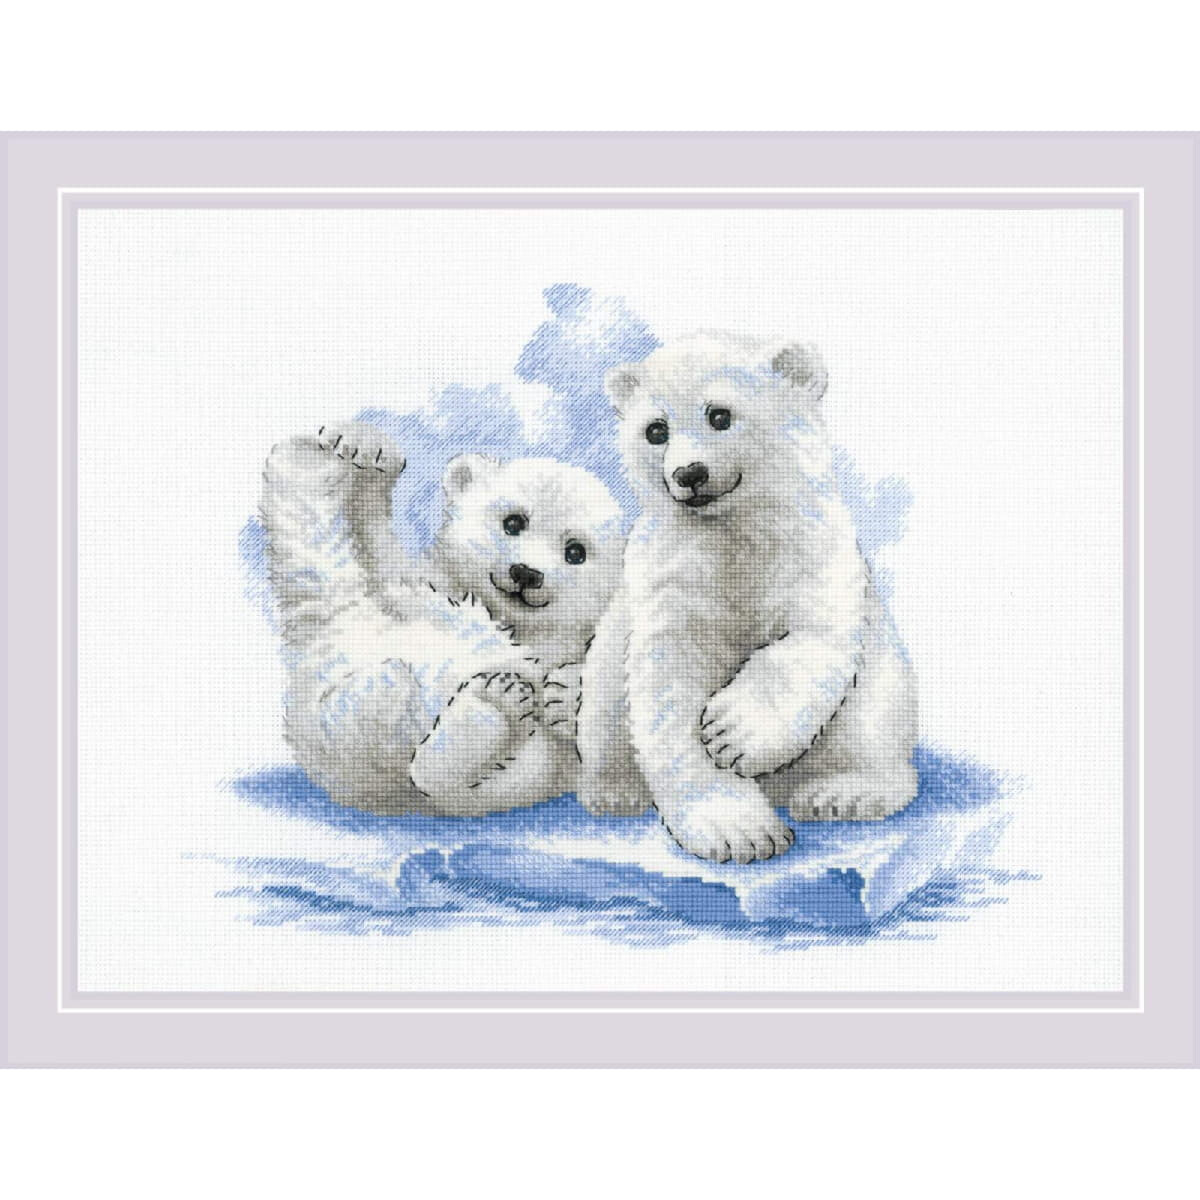 Riolis counted cross stitch kit "Bear Cubs on...